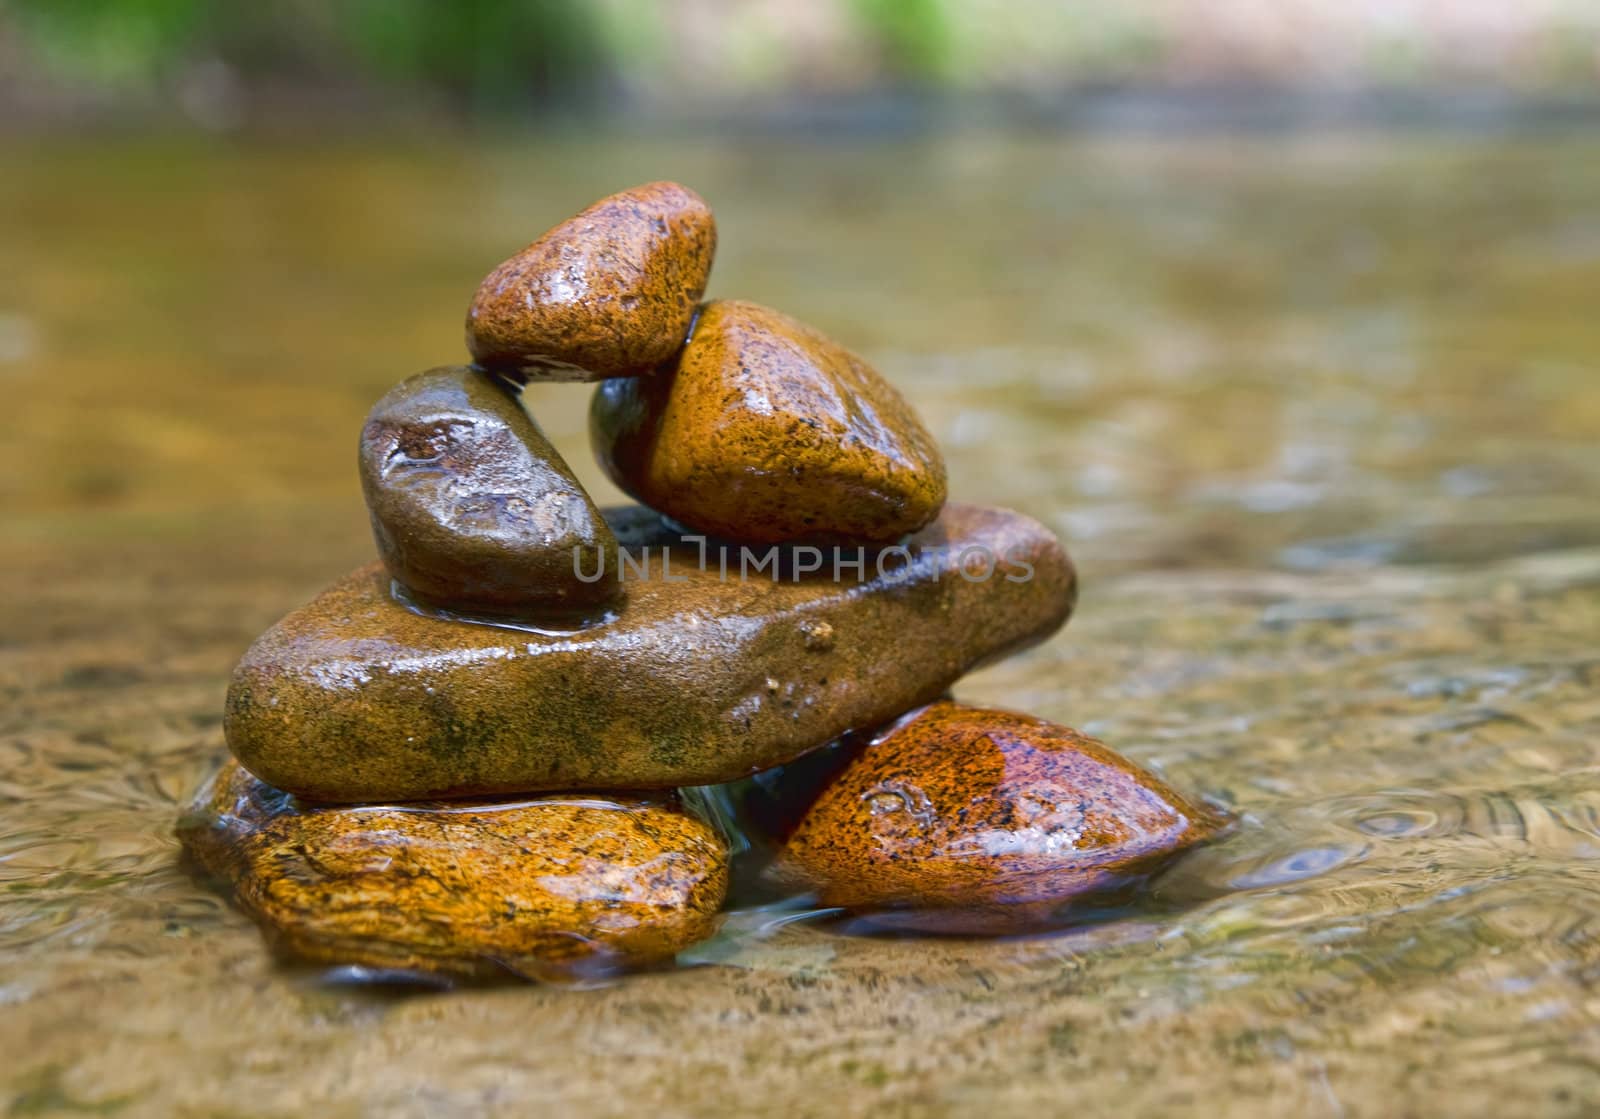 great image of a stack of rocks in a stream